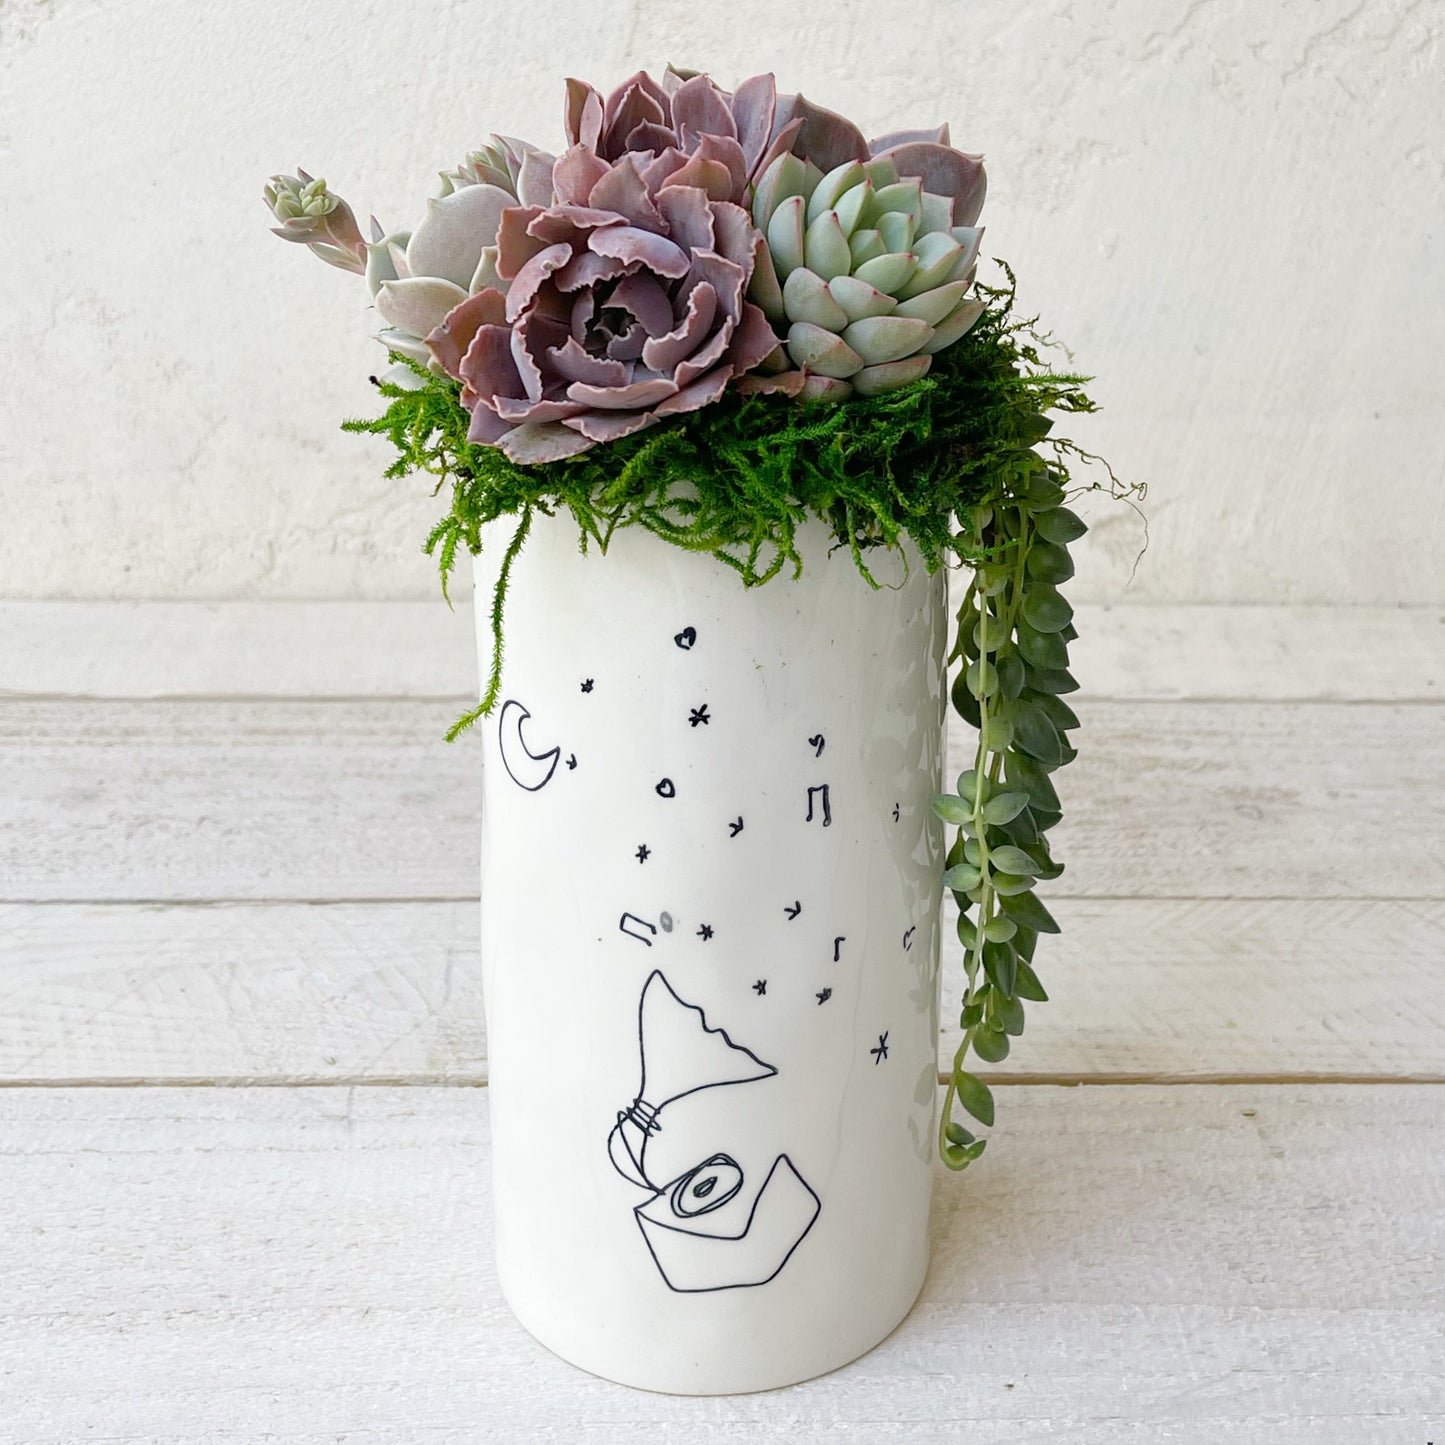 Love Letter Vase Planted With Succulents.